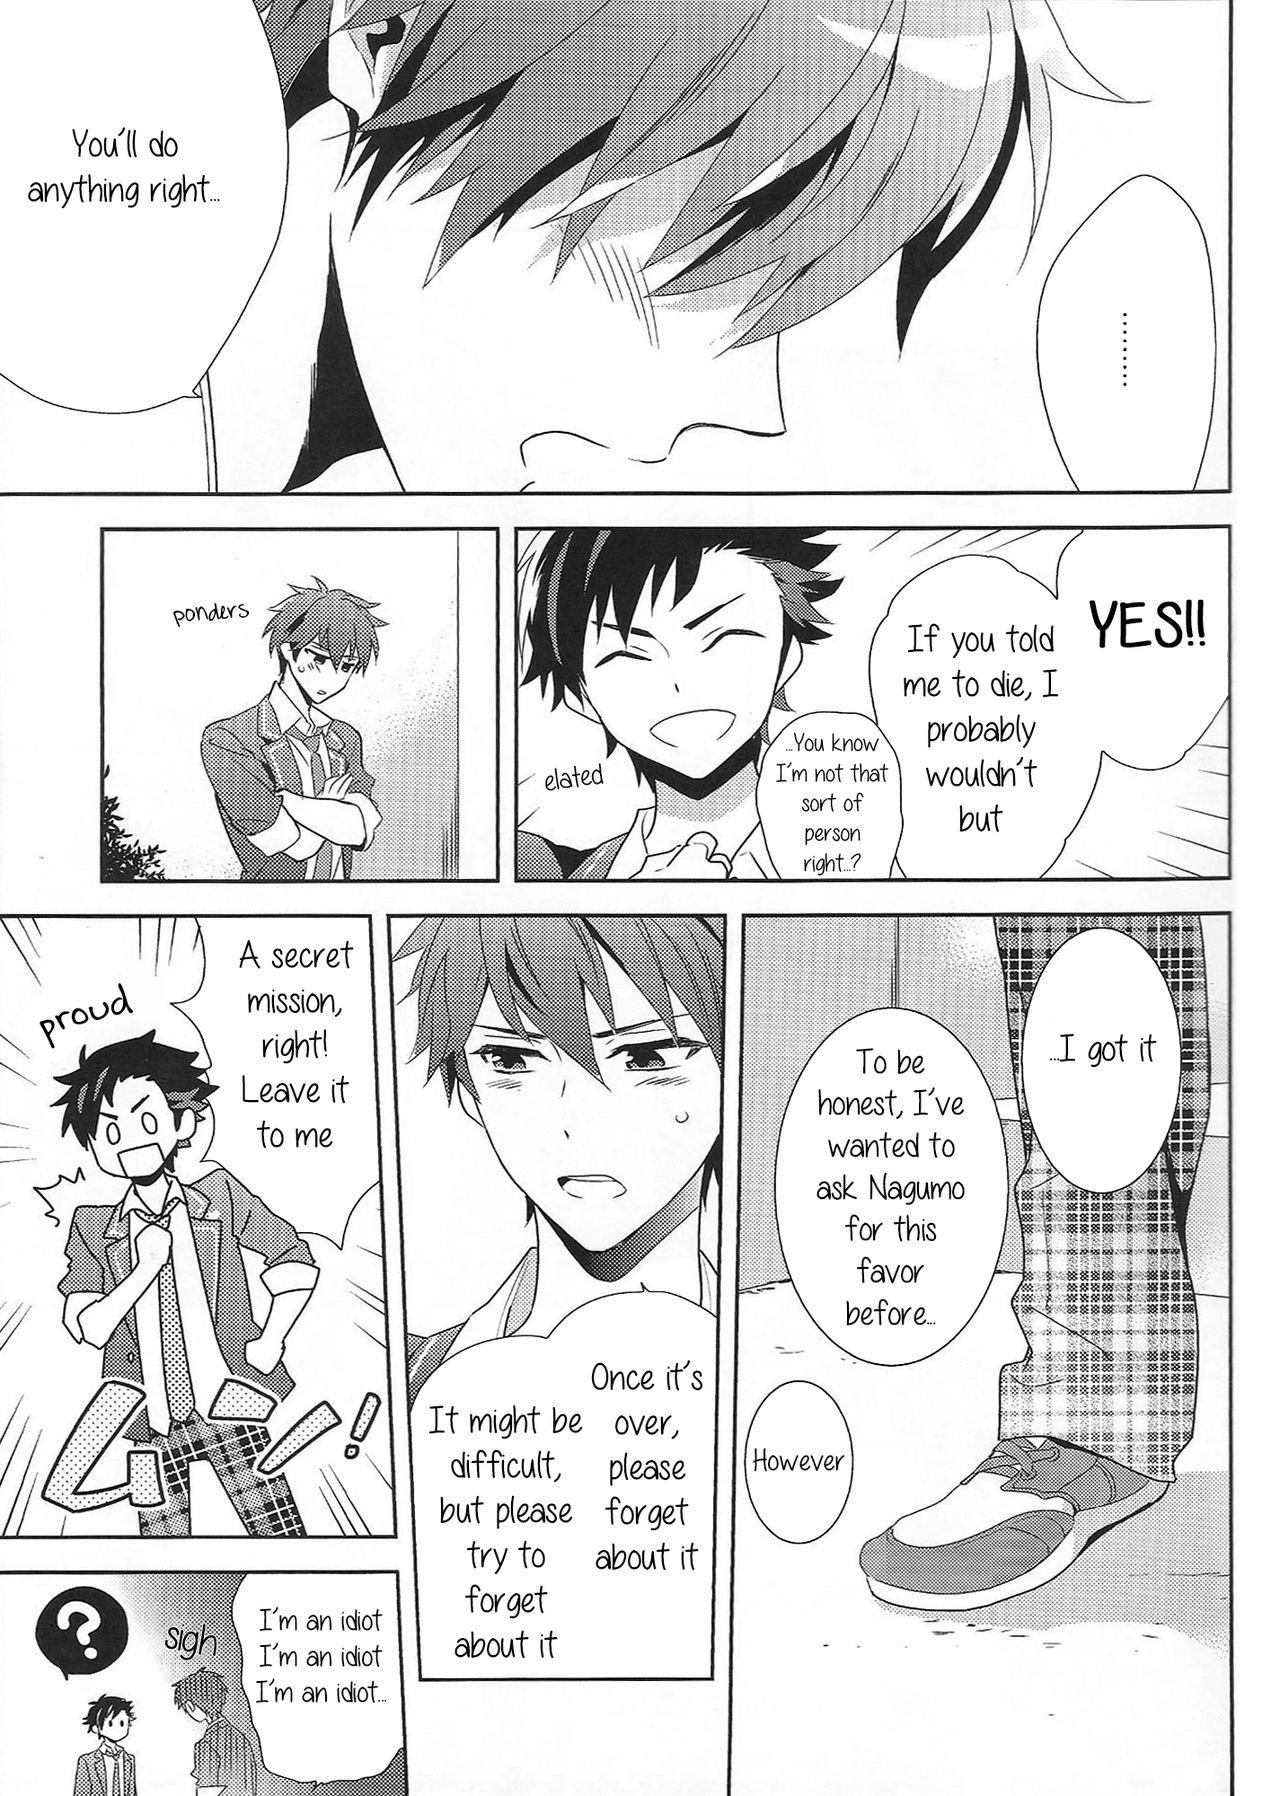 Nagumo! Isshou no Onegai da! - This Is The Only Thing I'll Ever Ask You! 5